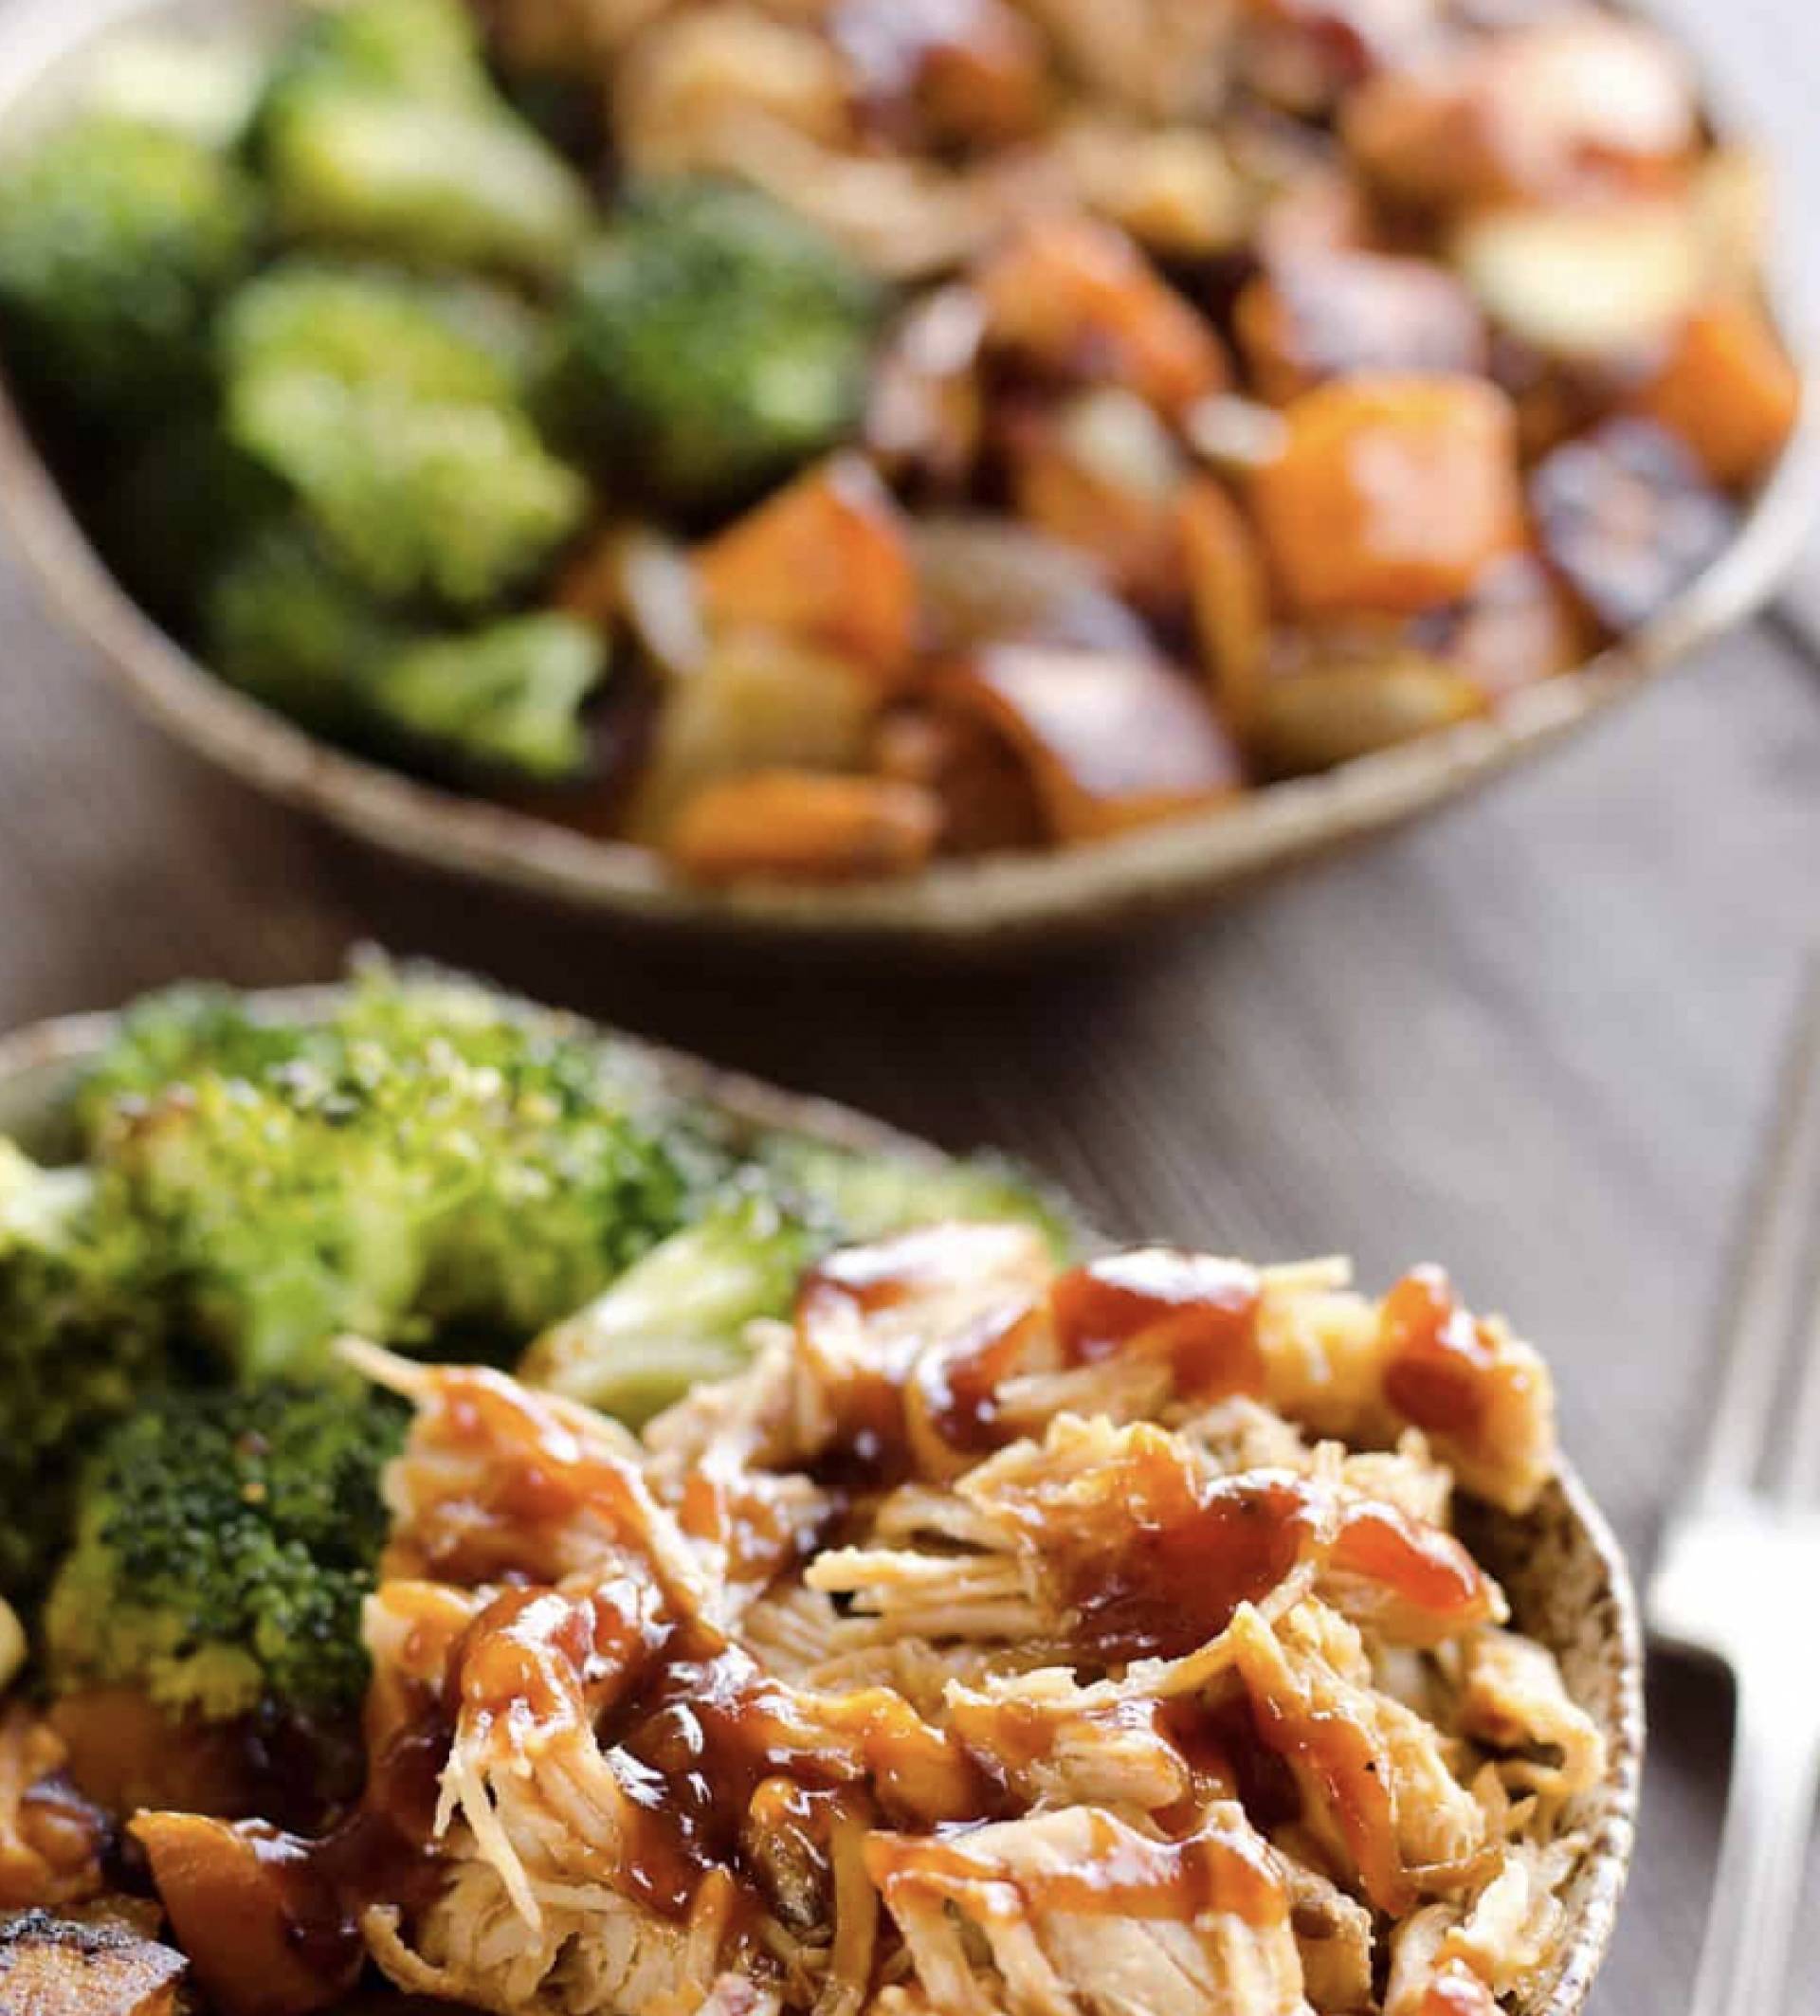 Smoked Pulled Chicken with House Broccoli (GL)